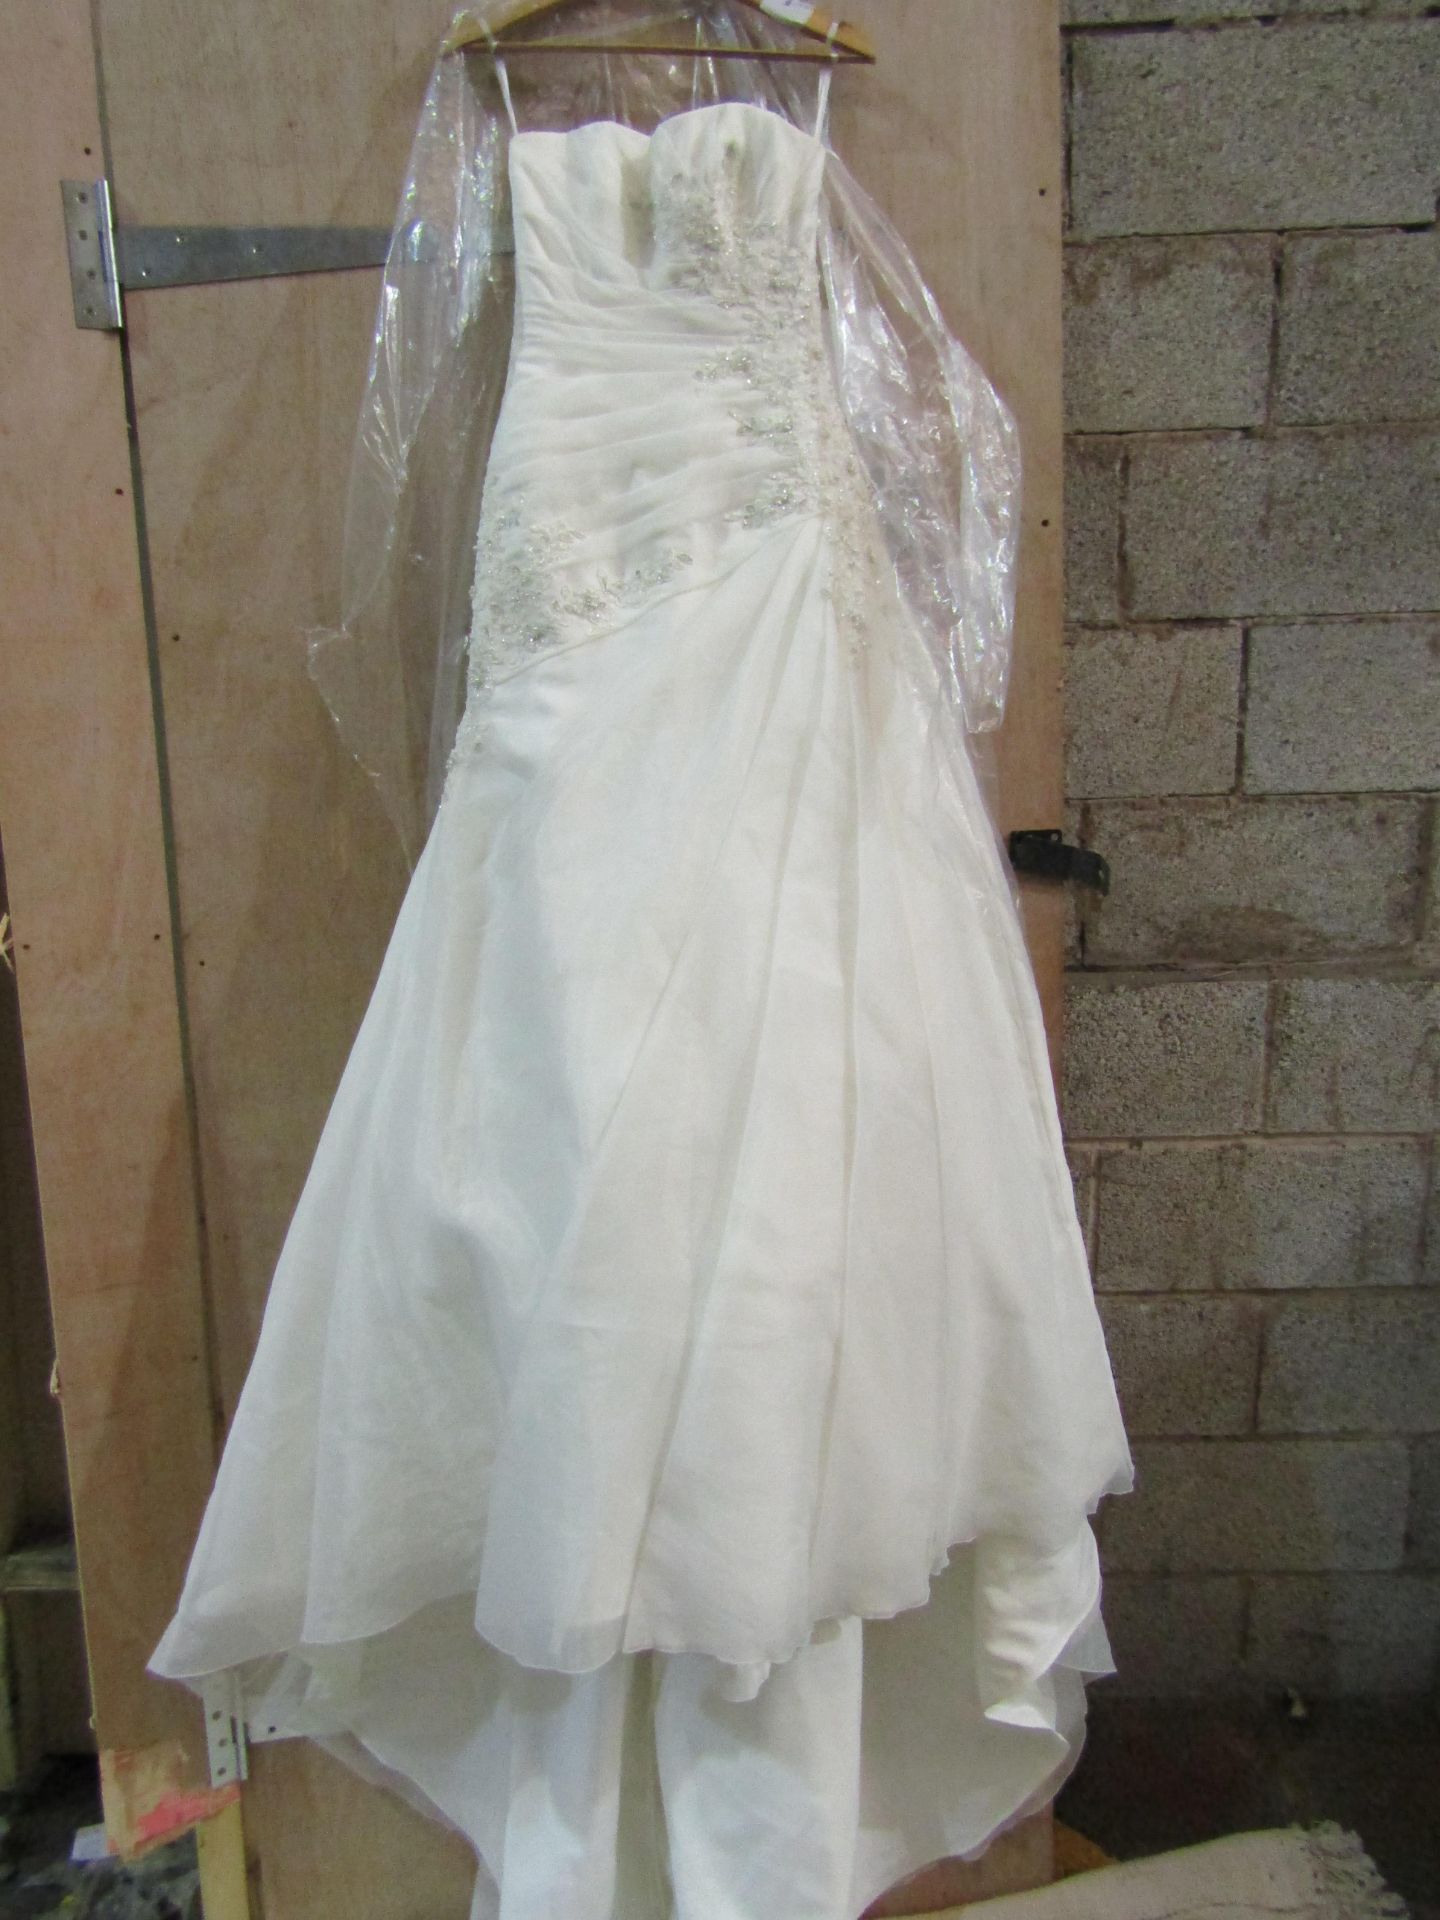 Approx 500 pieces of wedding shop stock to include wedding dresses, mother of the bride, dresses, - Image 56 of 71